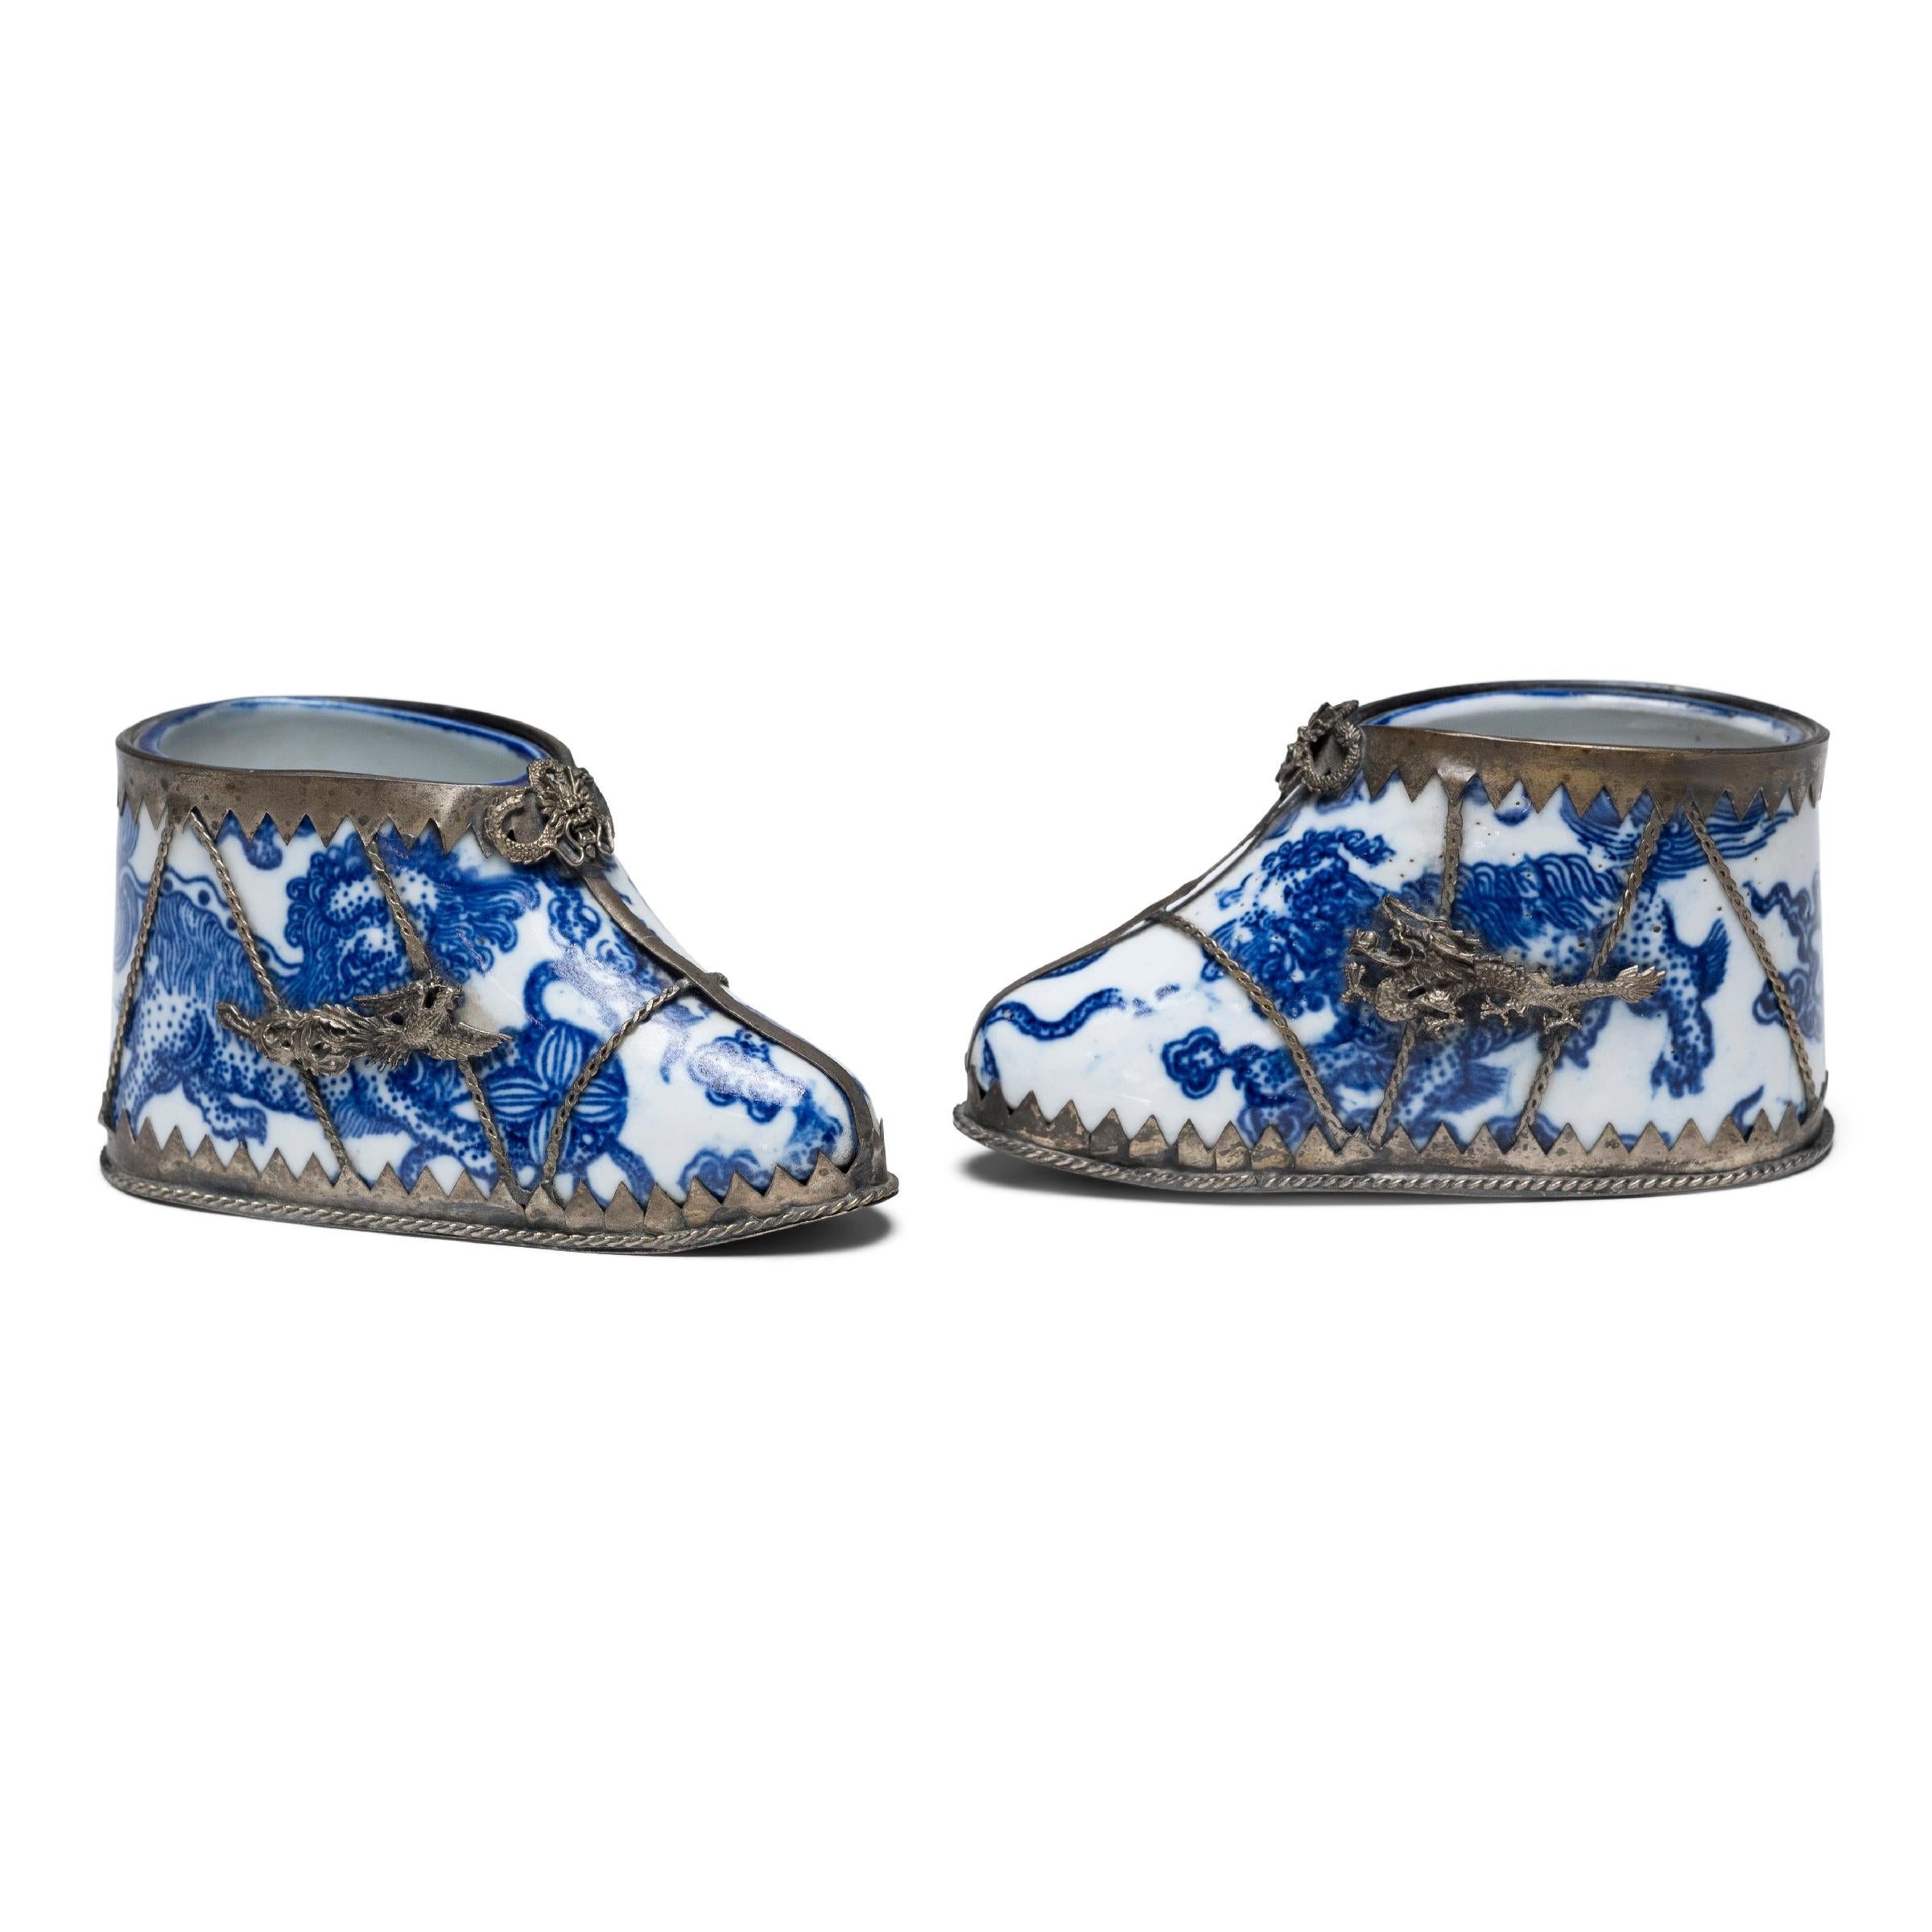 These dainty porcelain slippers are shaped to resemble a lotus bud and recreate the pointed silk shoes that enhanced the diminutive shape of bound feet. The porcelain lotus slippers are glazed with a blue-and-white design of guardian fu lions